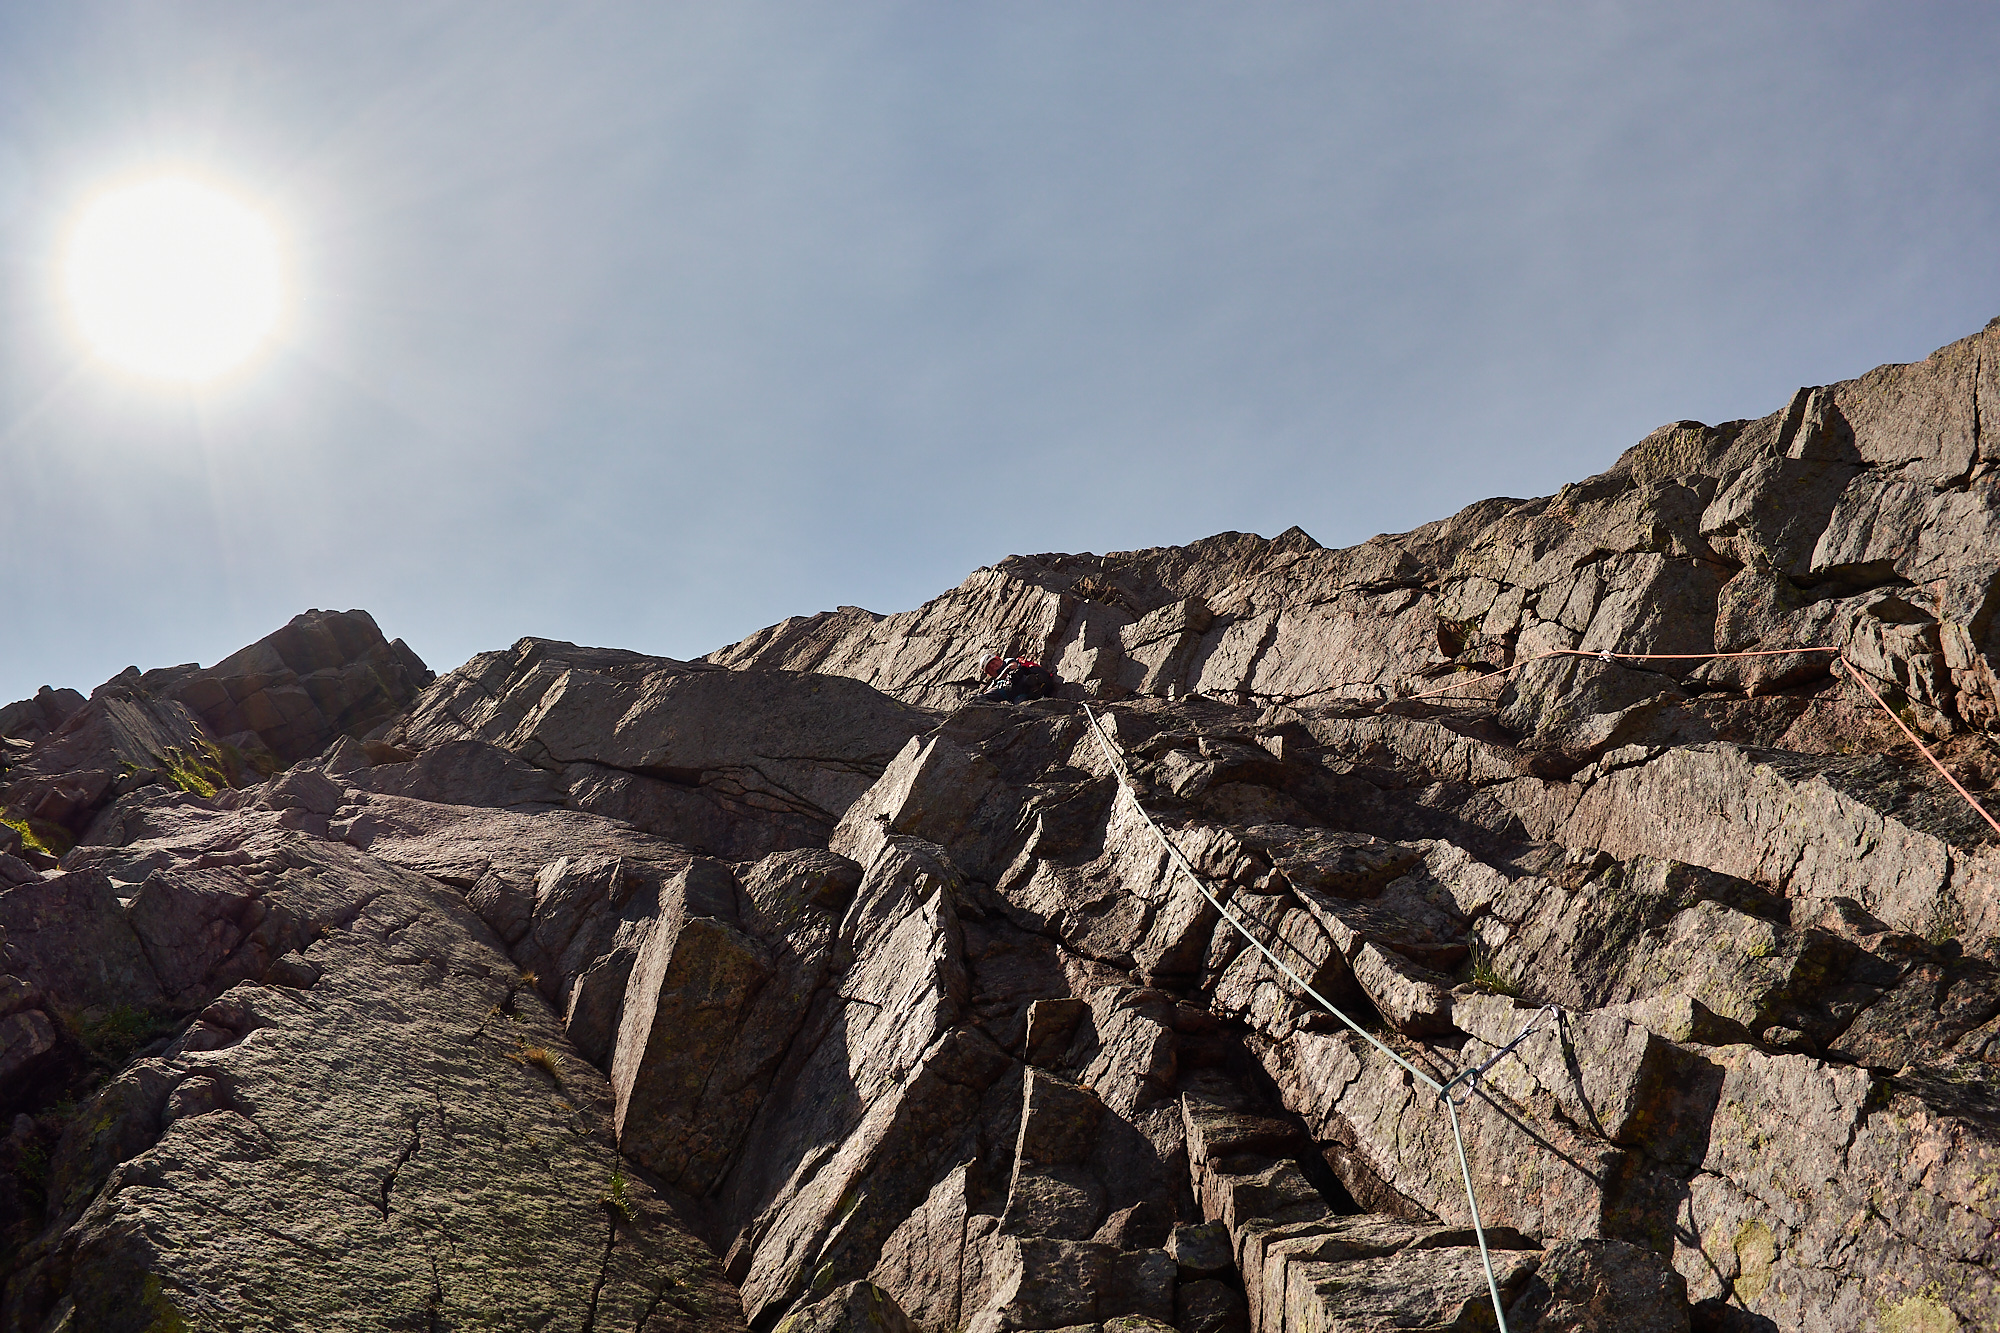 A climber on the first pitch of the rock climb Grey Slab in Coire Sputan Dearg in the Cairngorms on a sunny day